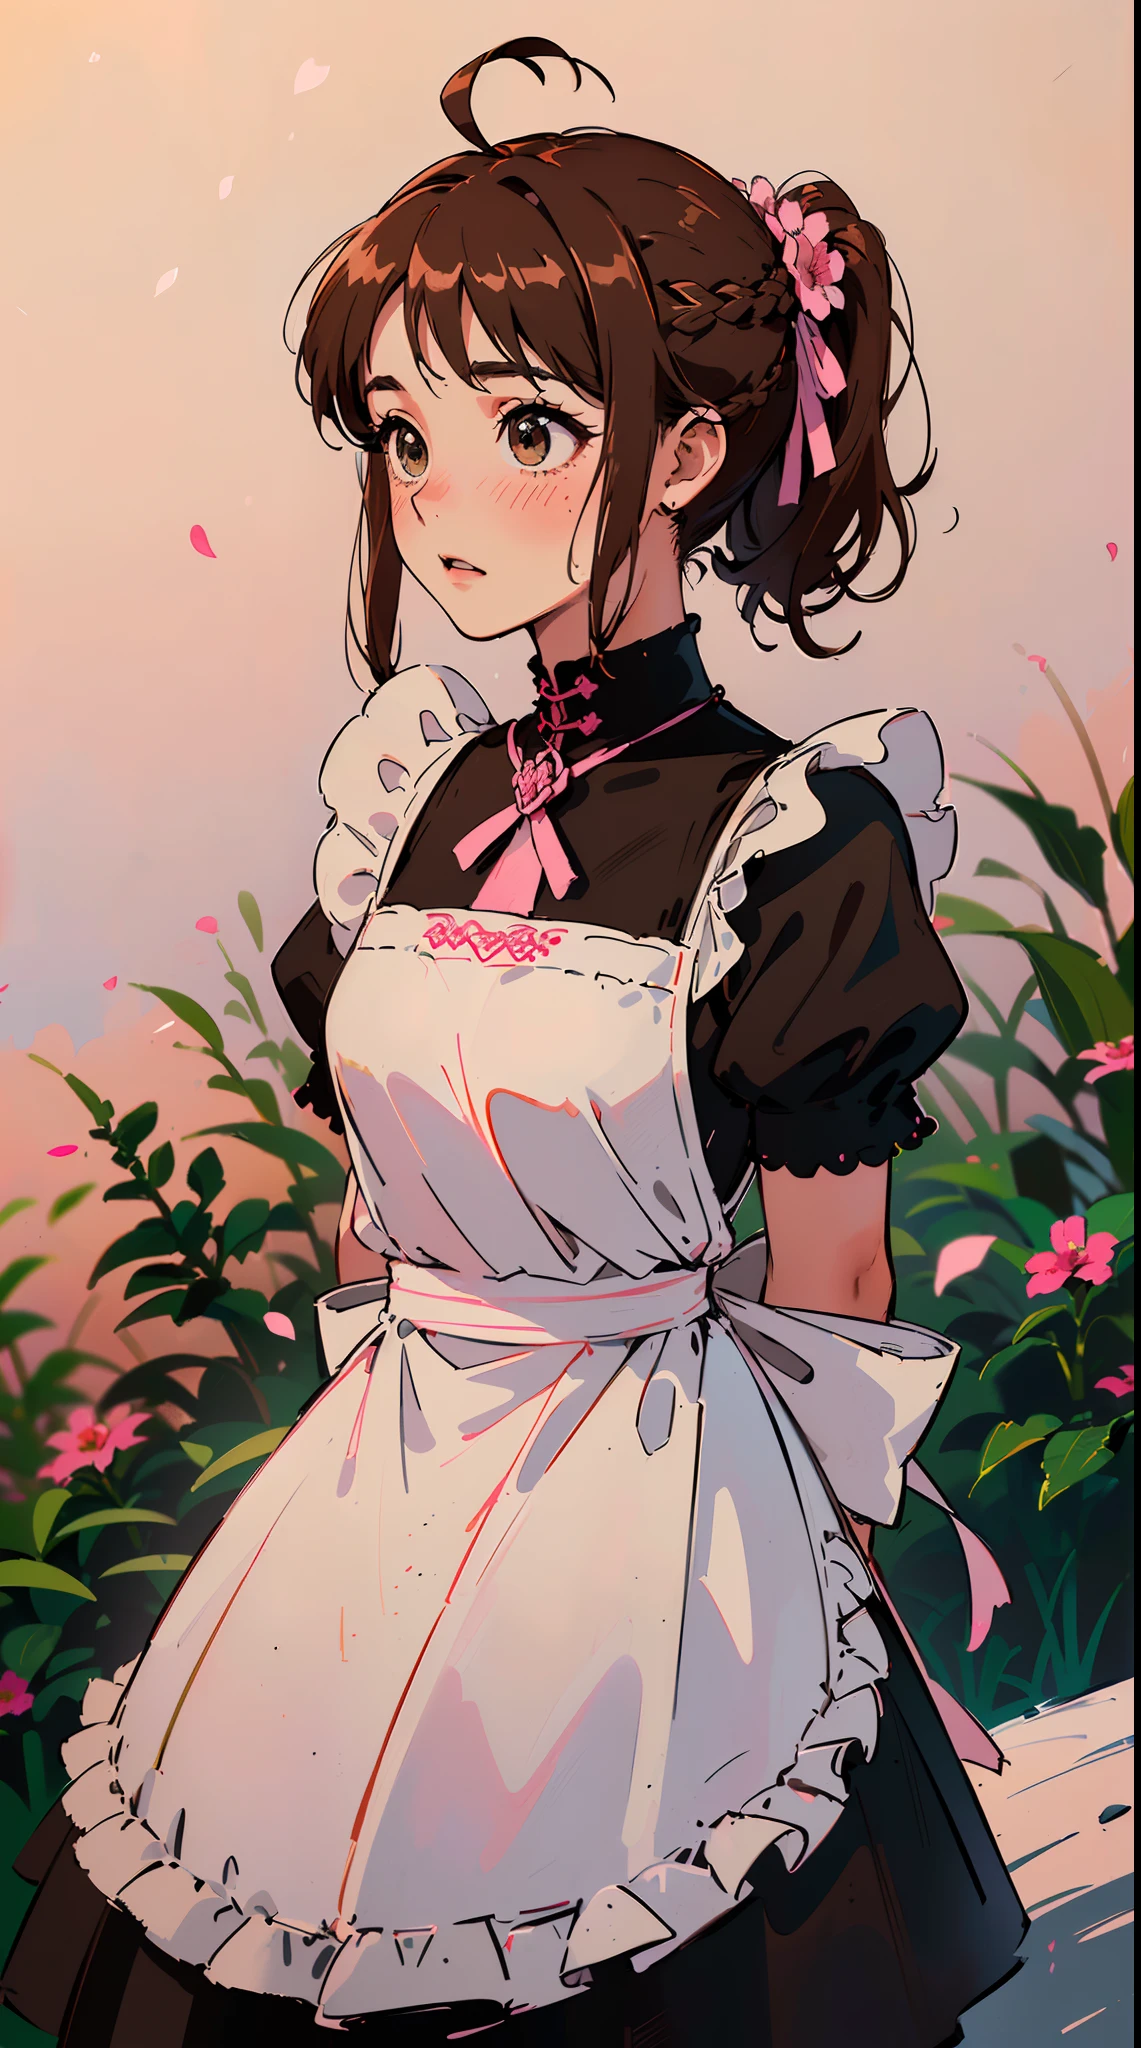 (((((((arms behind back,Blushing,cute cheeks,brown hair，gothic maid apron with flower))))))，((1girl,Solo,under-aged,11years old,short,Amazing,Cute Korean mixed-race girl，rosto magro,))(Masterpiece,Best quality, offcial art, Beautiful and aesthetic:1.2),((HD,Golden ratio,)) (16k),((sakura petals,snow pieces)),(Physically-based rendering),((((on a desert,at night,)))) (((highdetailskin,)))，((hair crown)),((((detailed hairs|middle hair|french braid|knot top|soaked hair|side ponytail|ahoge)))),Slender,thicc,(masterpiece sidelighting),(The sheen),(Beautiful hair,Beautiful eyes,）[[Delicate fingers and hands:0.55]::0.85],(Detail fingers),(((Superior quality,)))),((unbelievable Ridiculous quality,)),((extremely_Detailed_Eyes_and_face)),Movie girl,(Dynamic configuration: 1.2),Brilliant, (Photorealistic), ((pink ribbon on hair)),Ultra-precise depiction, Ultra-detailed depiction